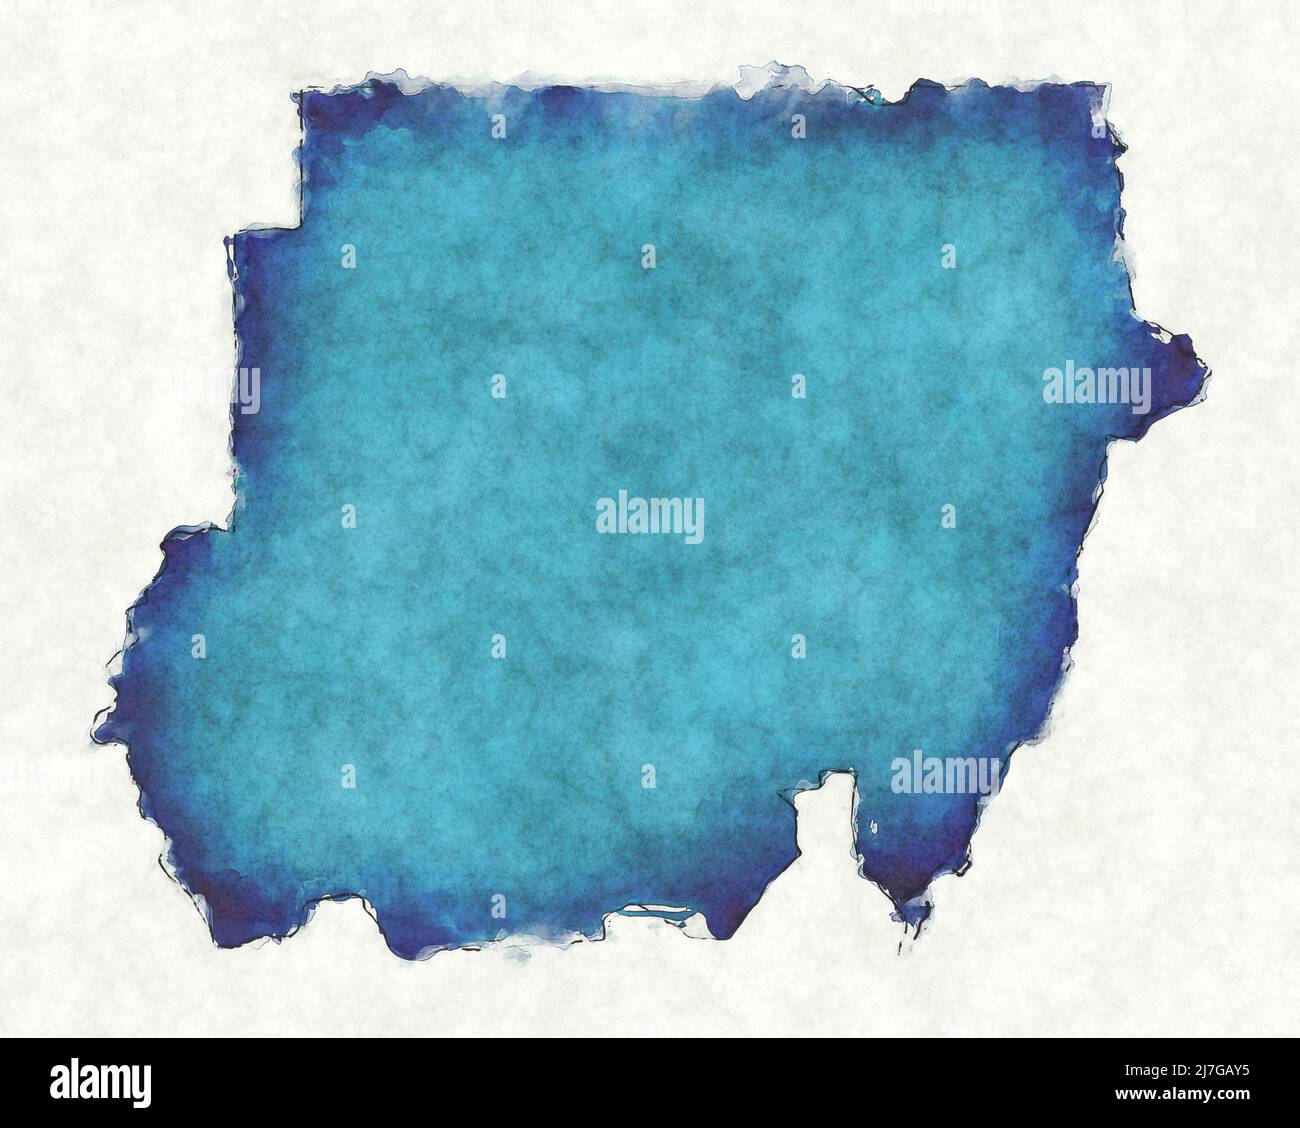 Sudan map with drawn lines and blue watercolor illustration Stock Photo